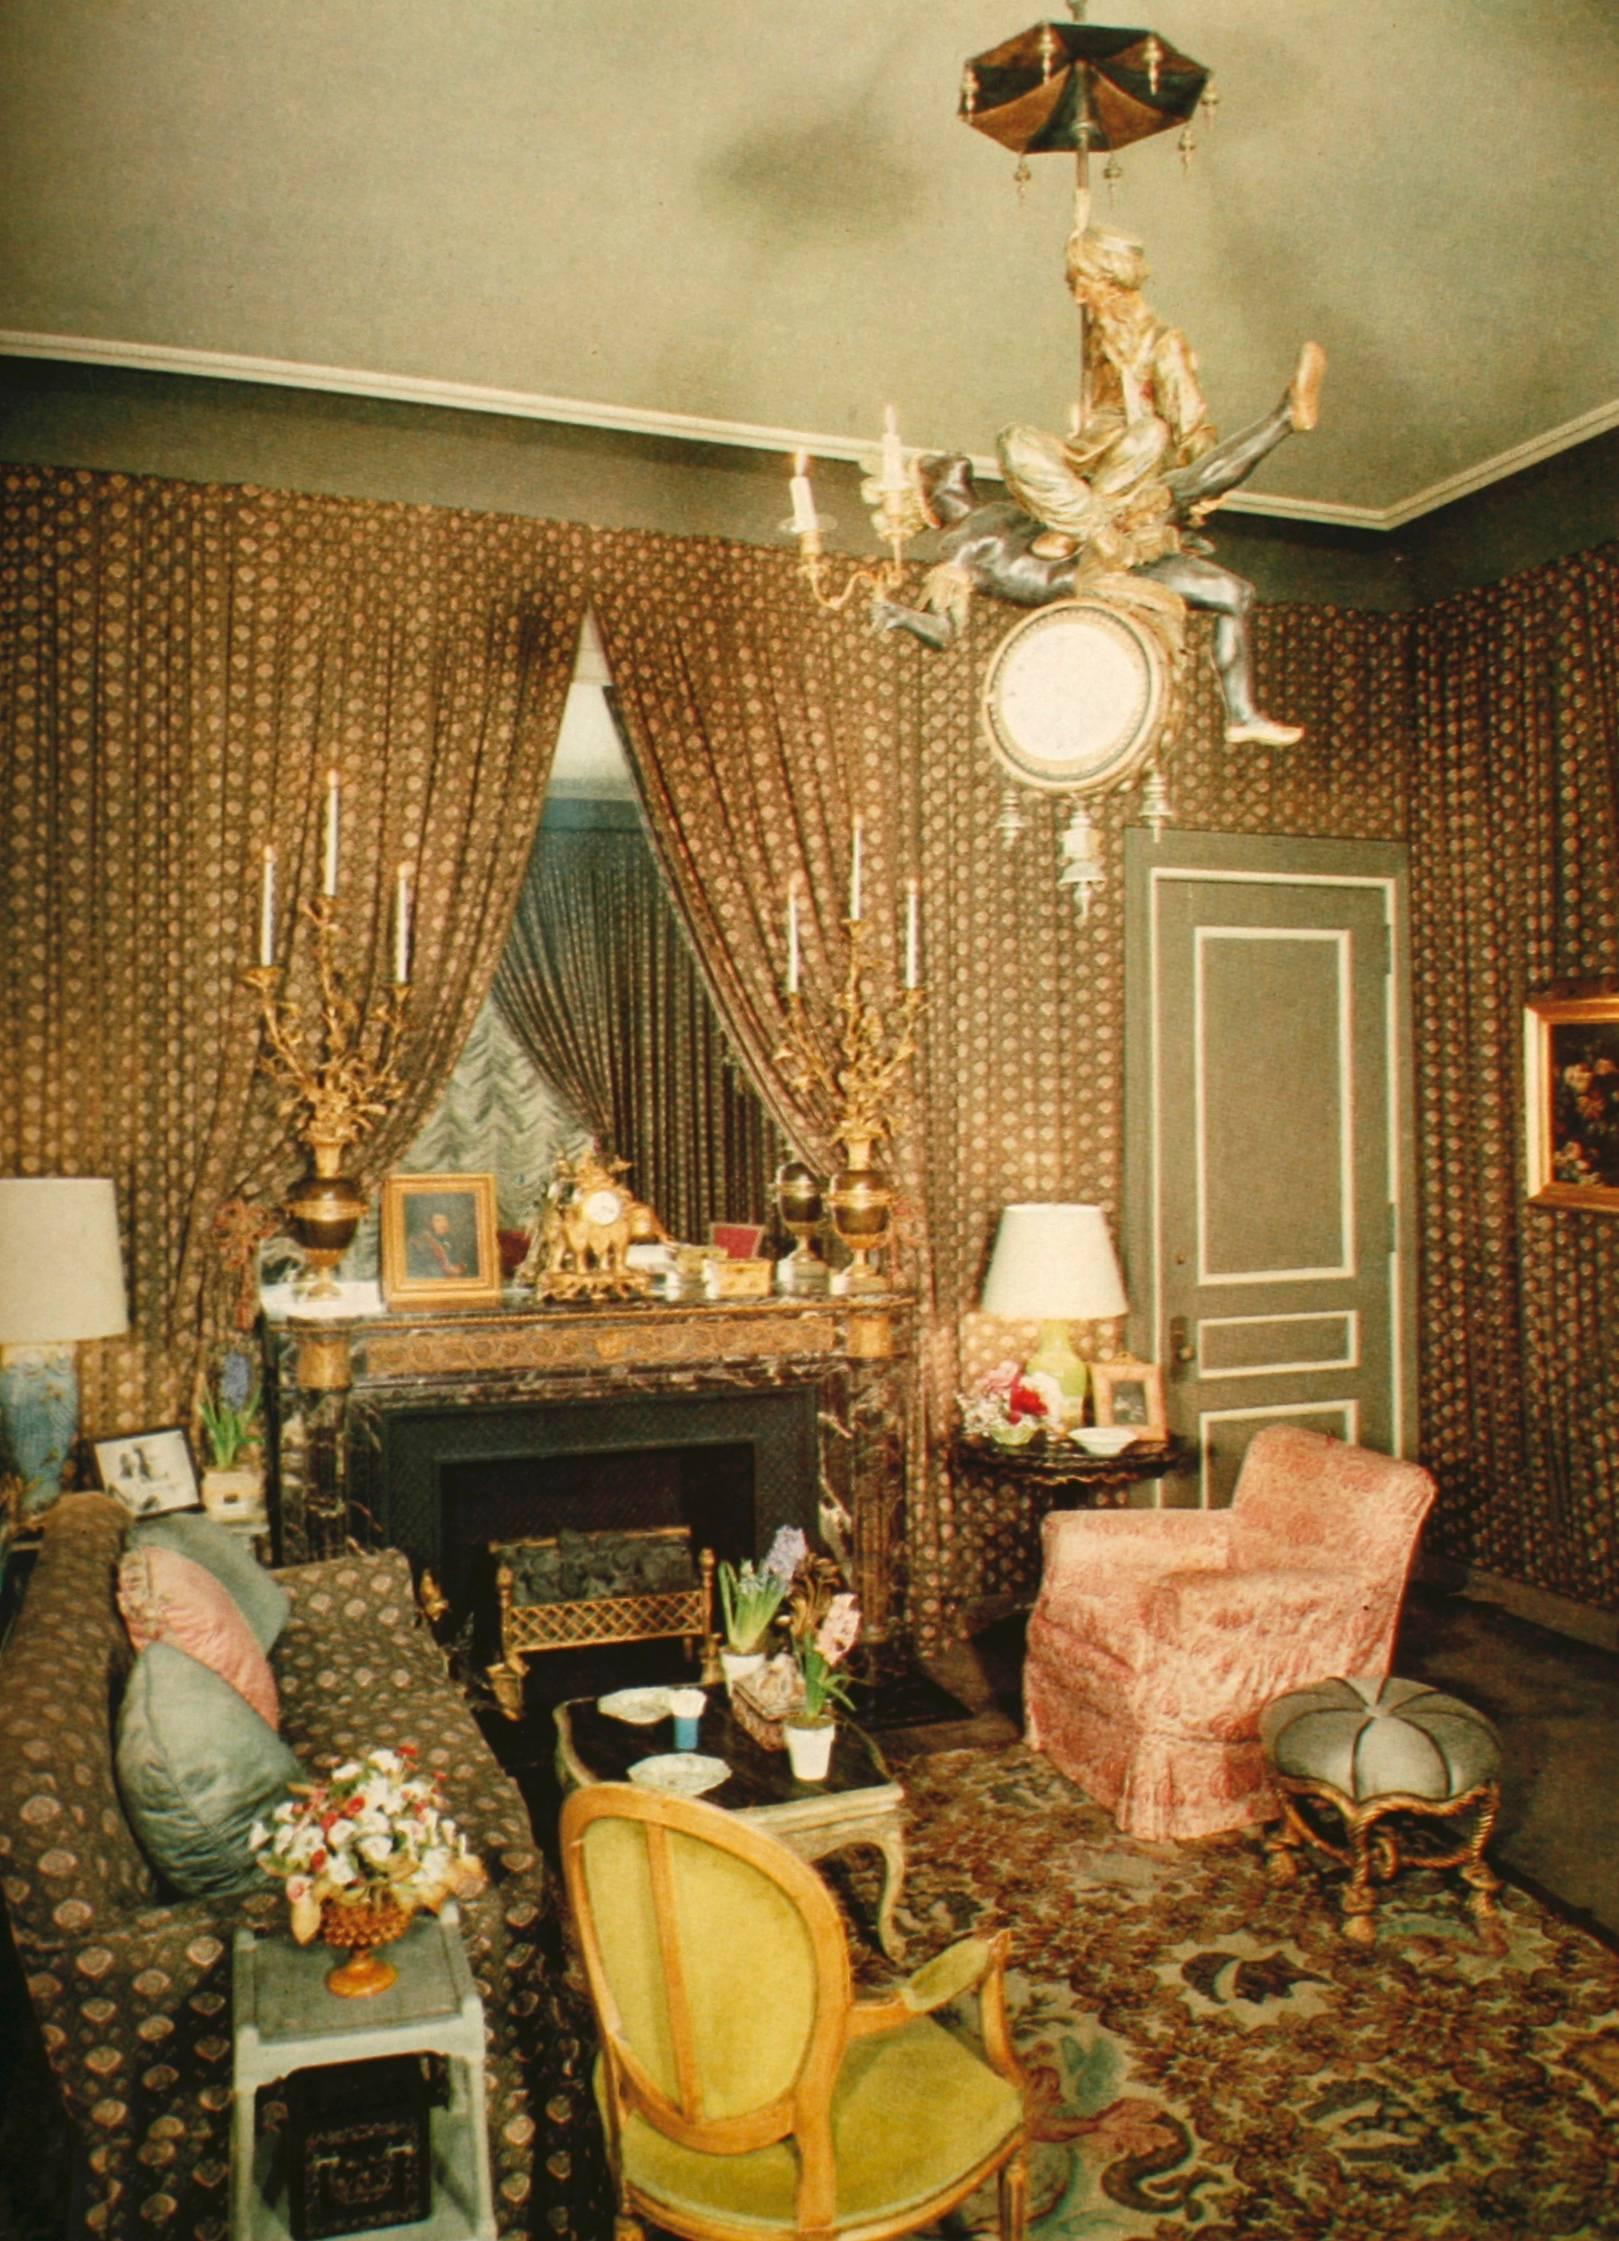 American Finest Rooms by America's Great Decorators by Katharine Tweed